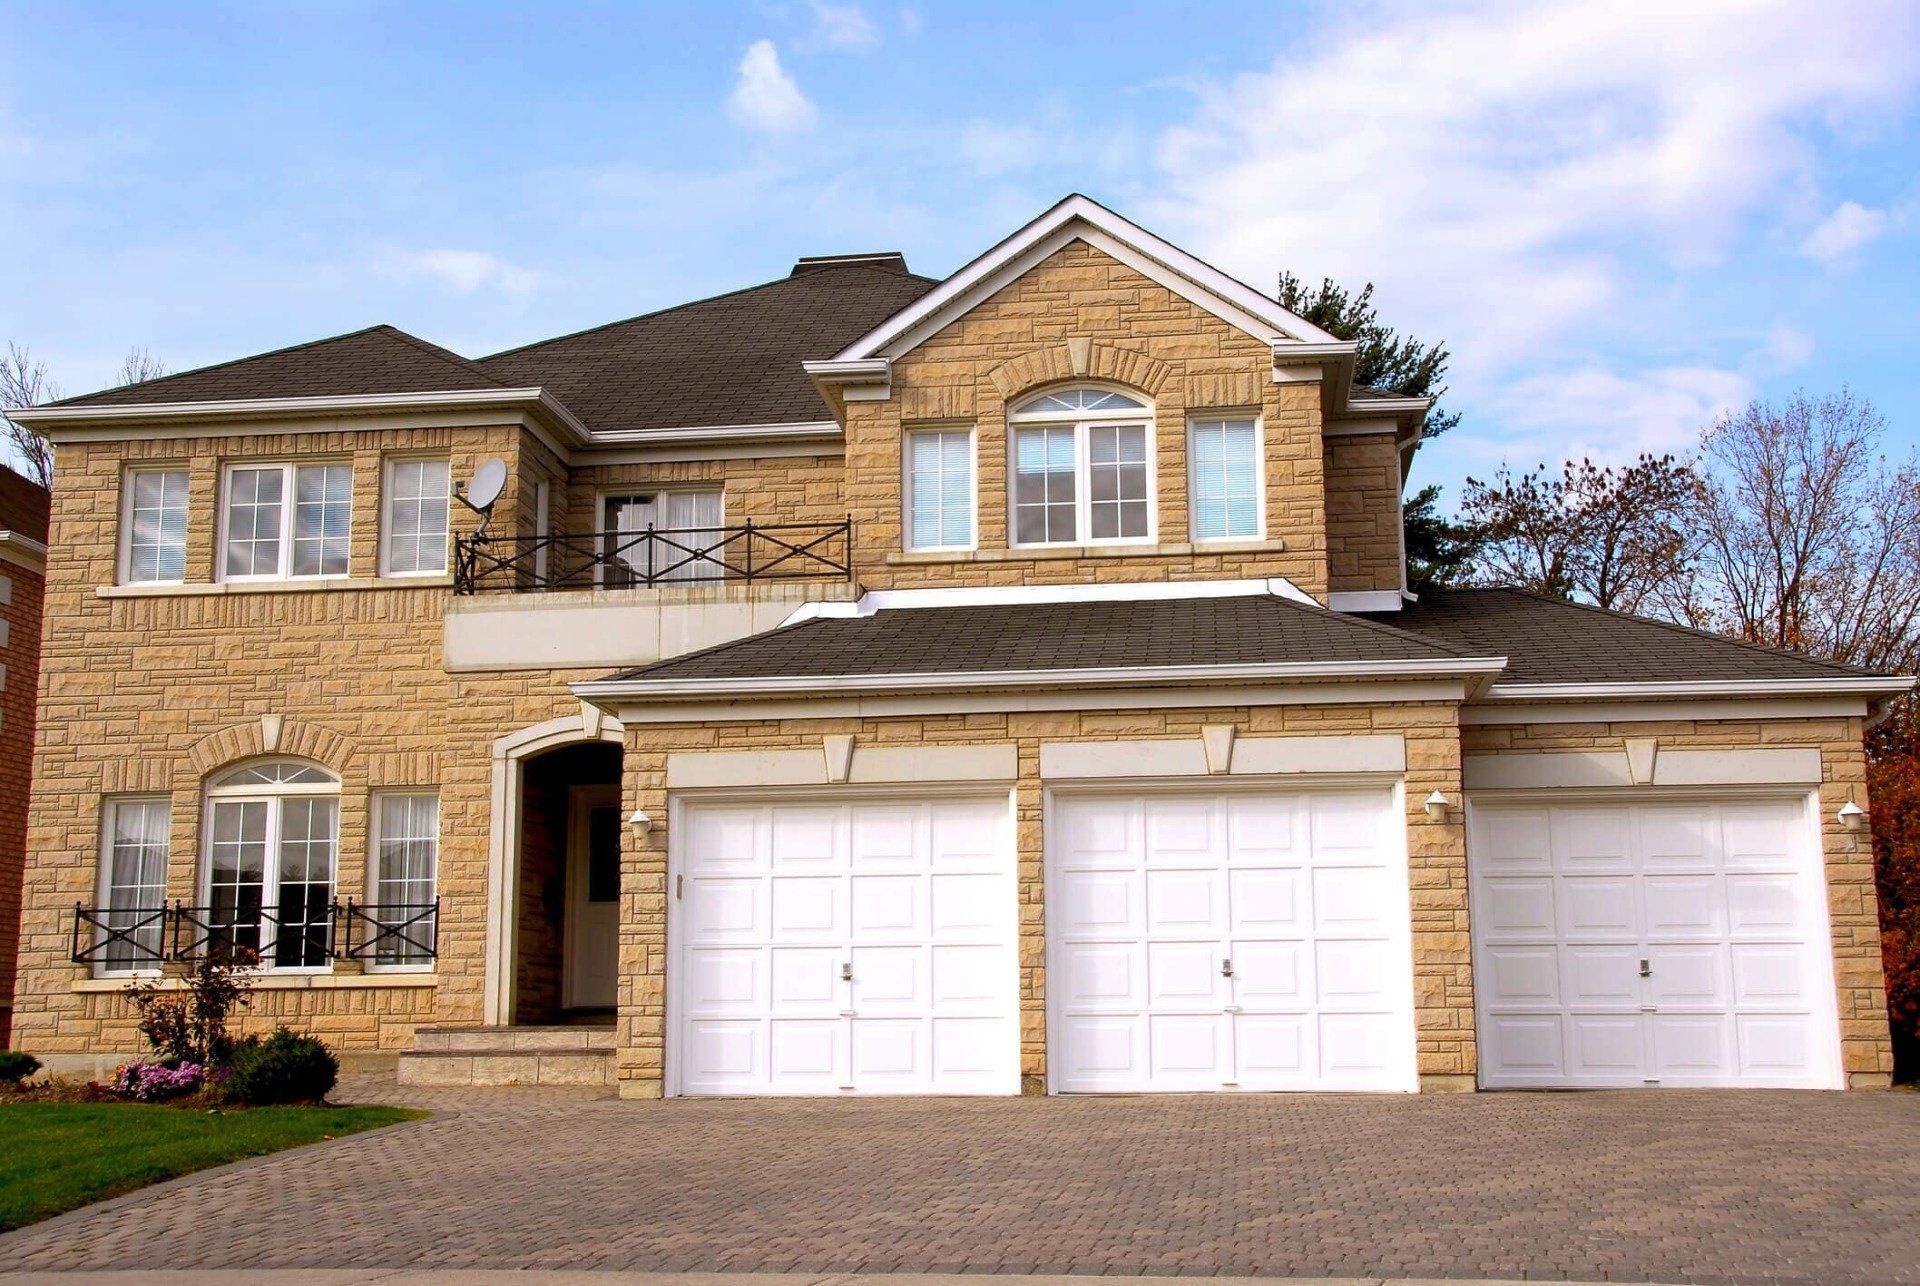 White Garage - Residential Remodeling in Channahon, IL